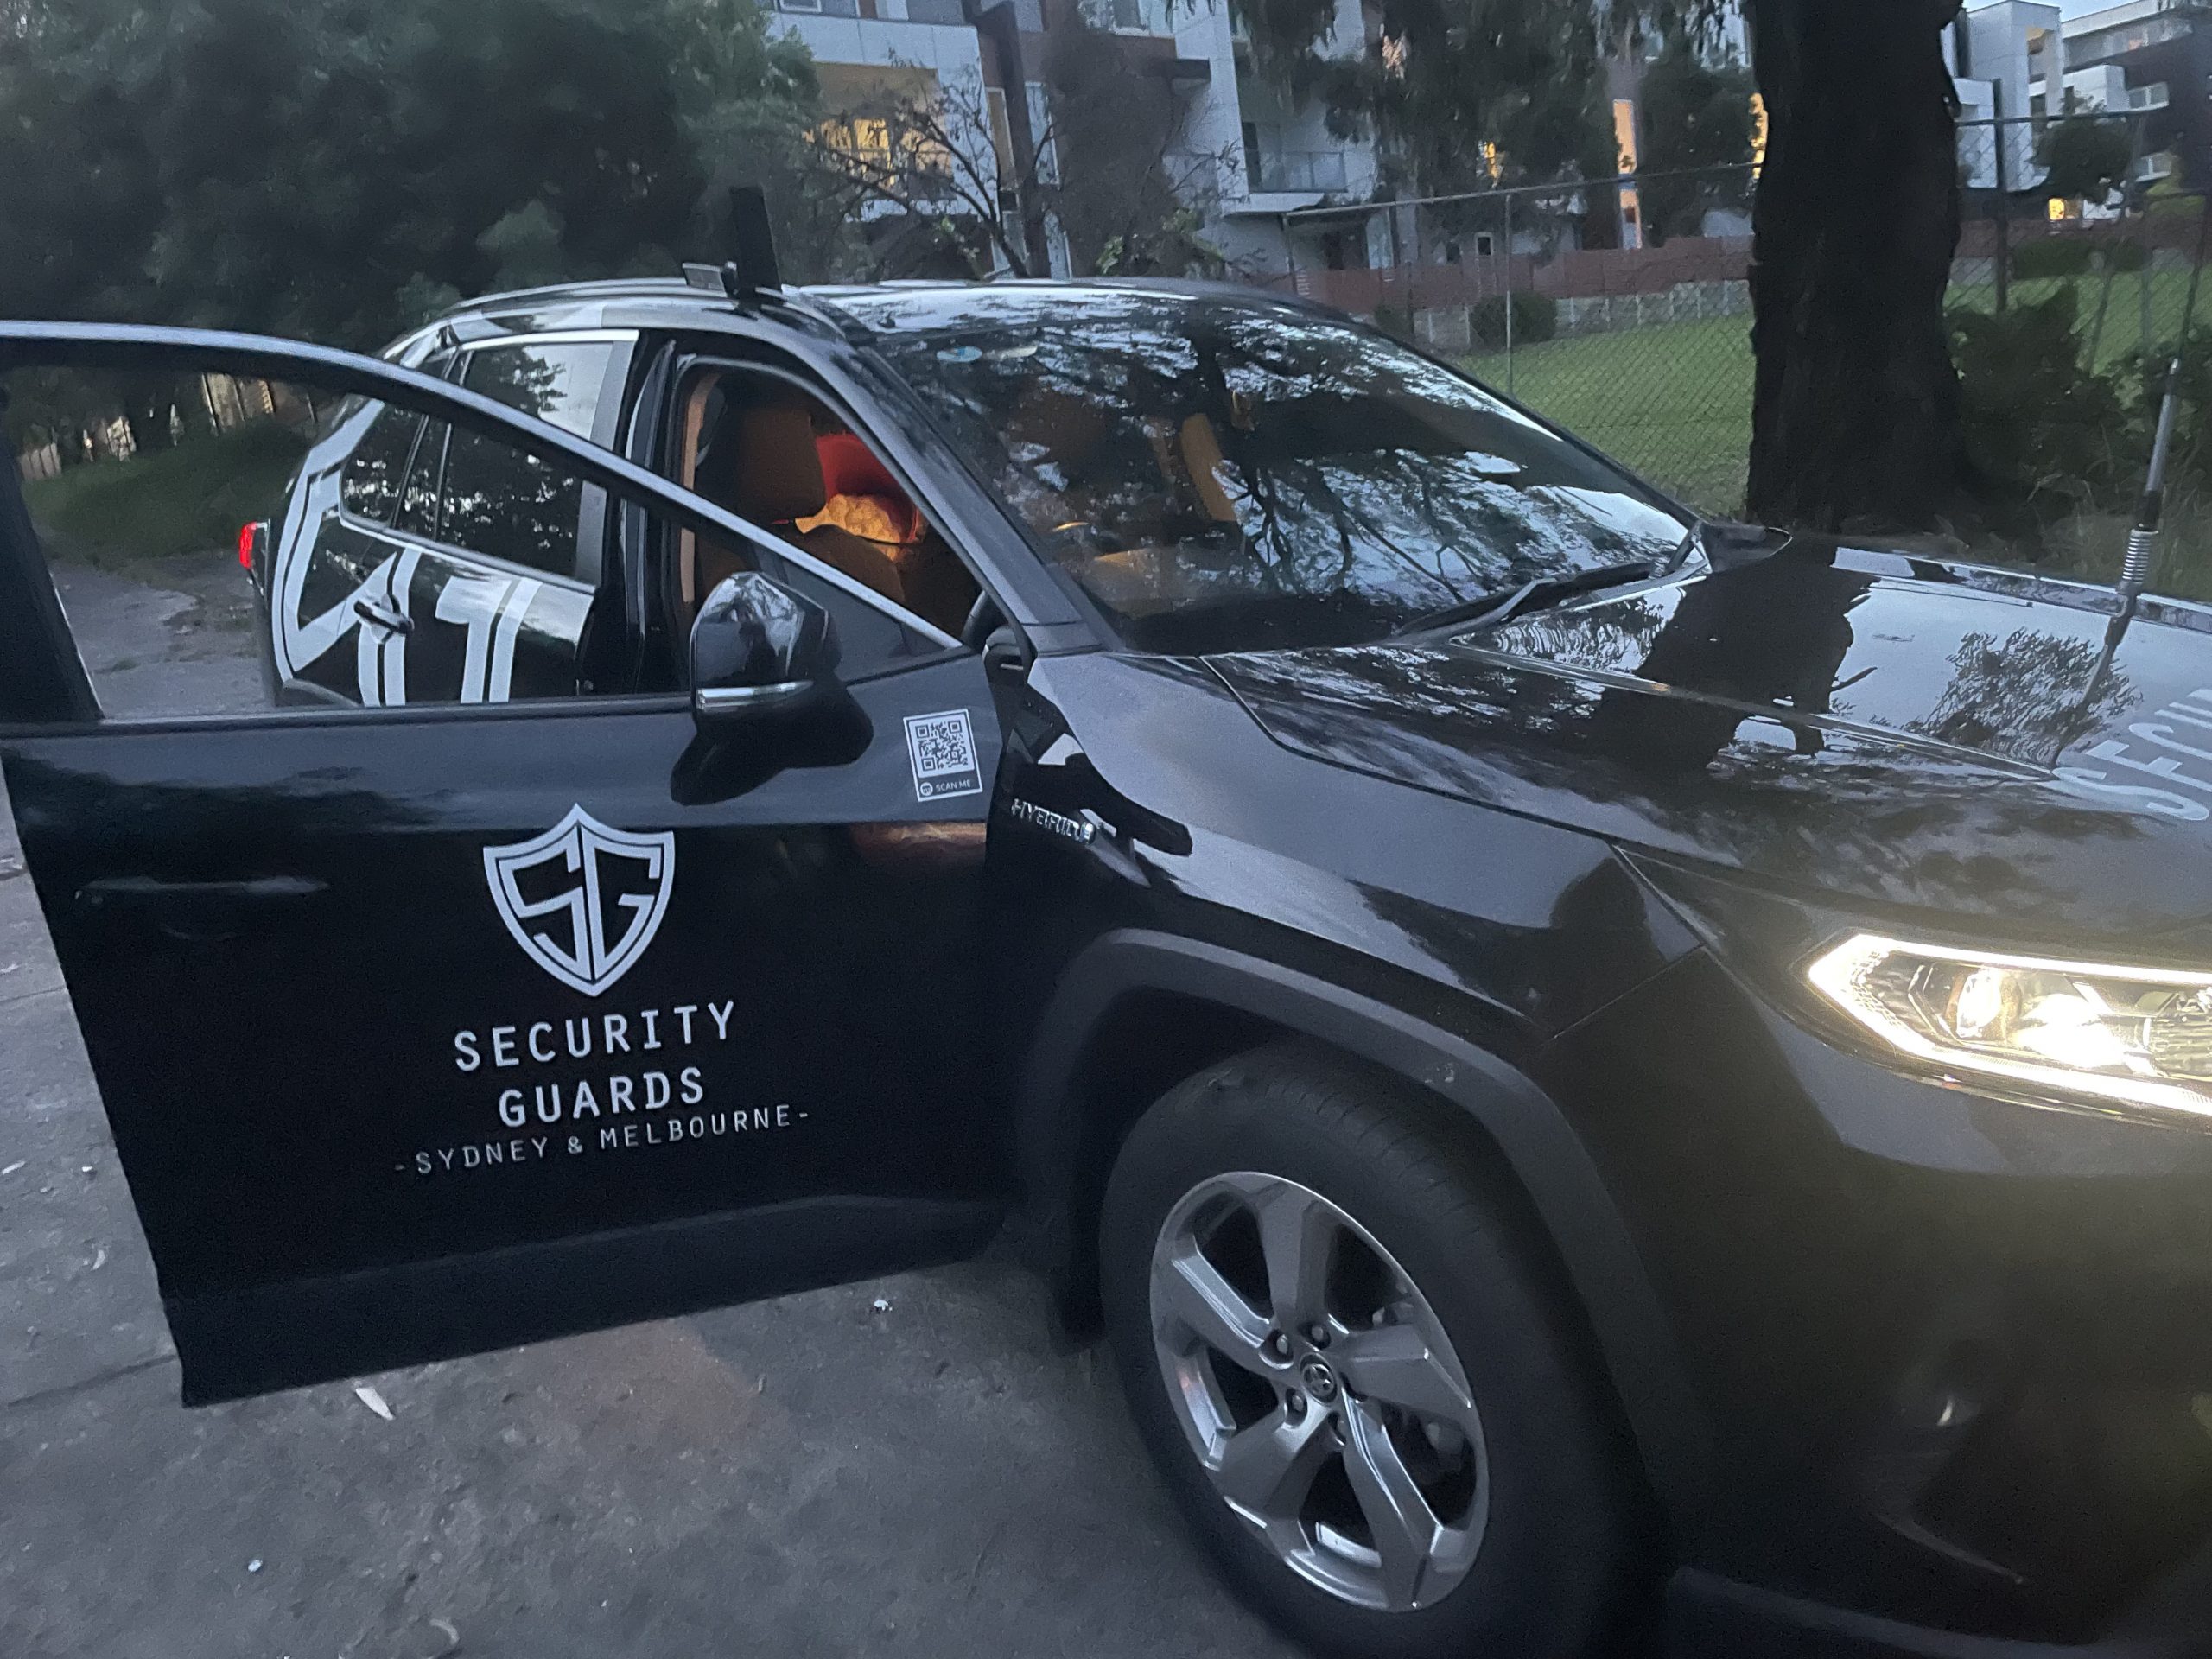 SECURITY GUARD HIRE IN ELWOOD MELBOURNE